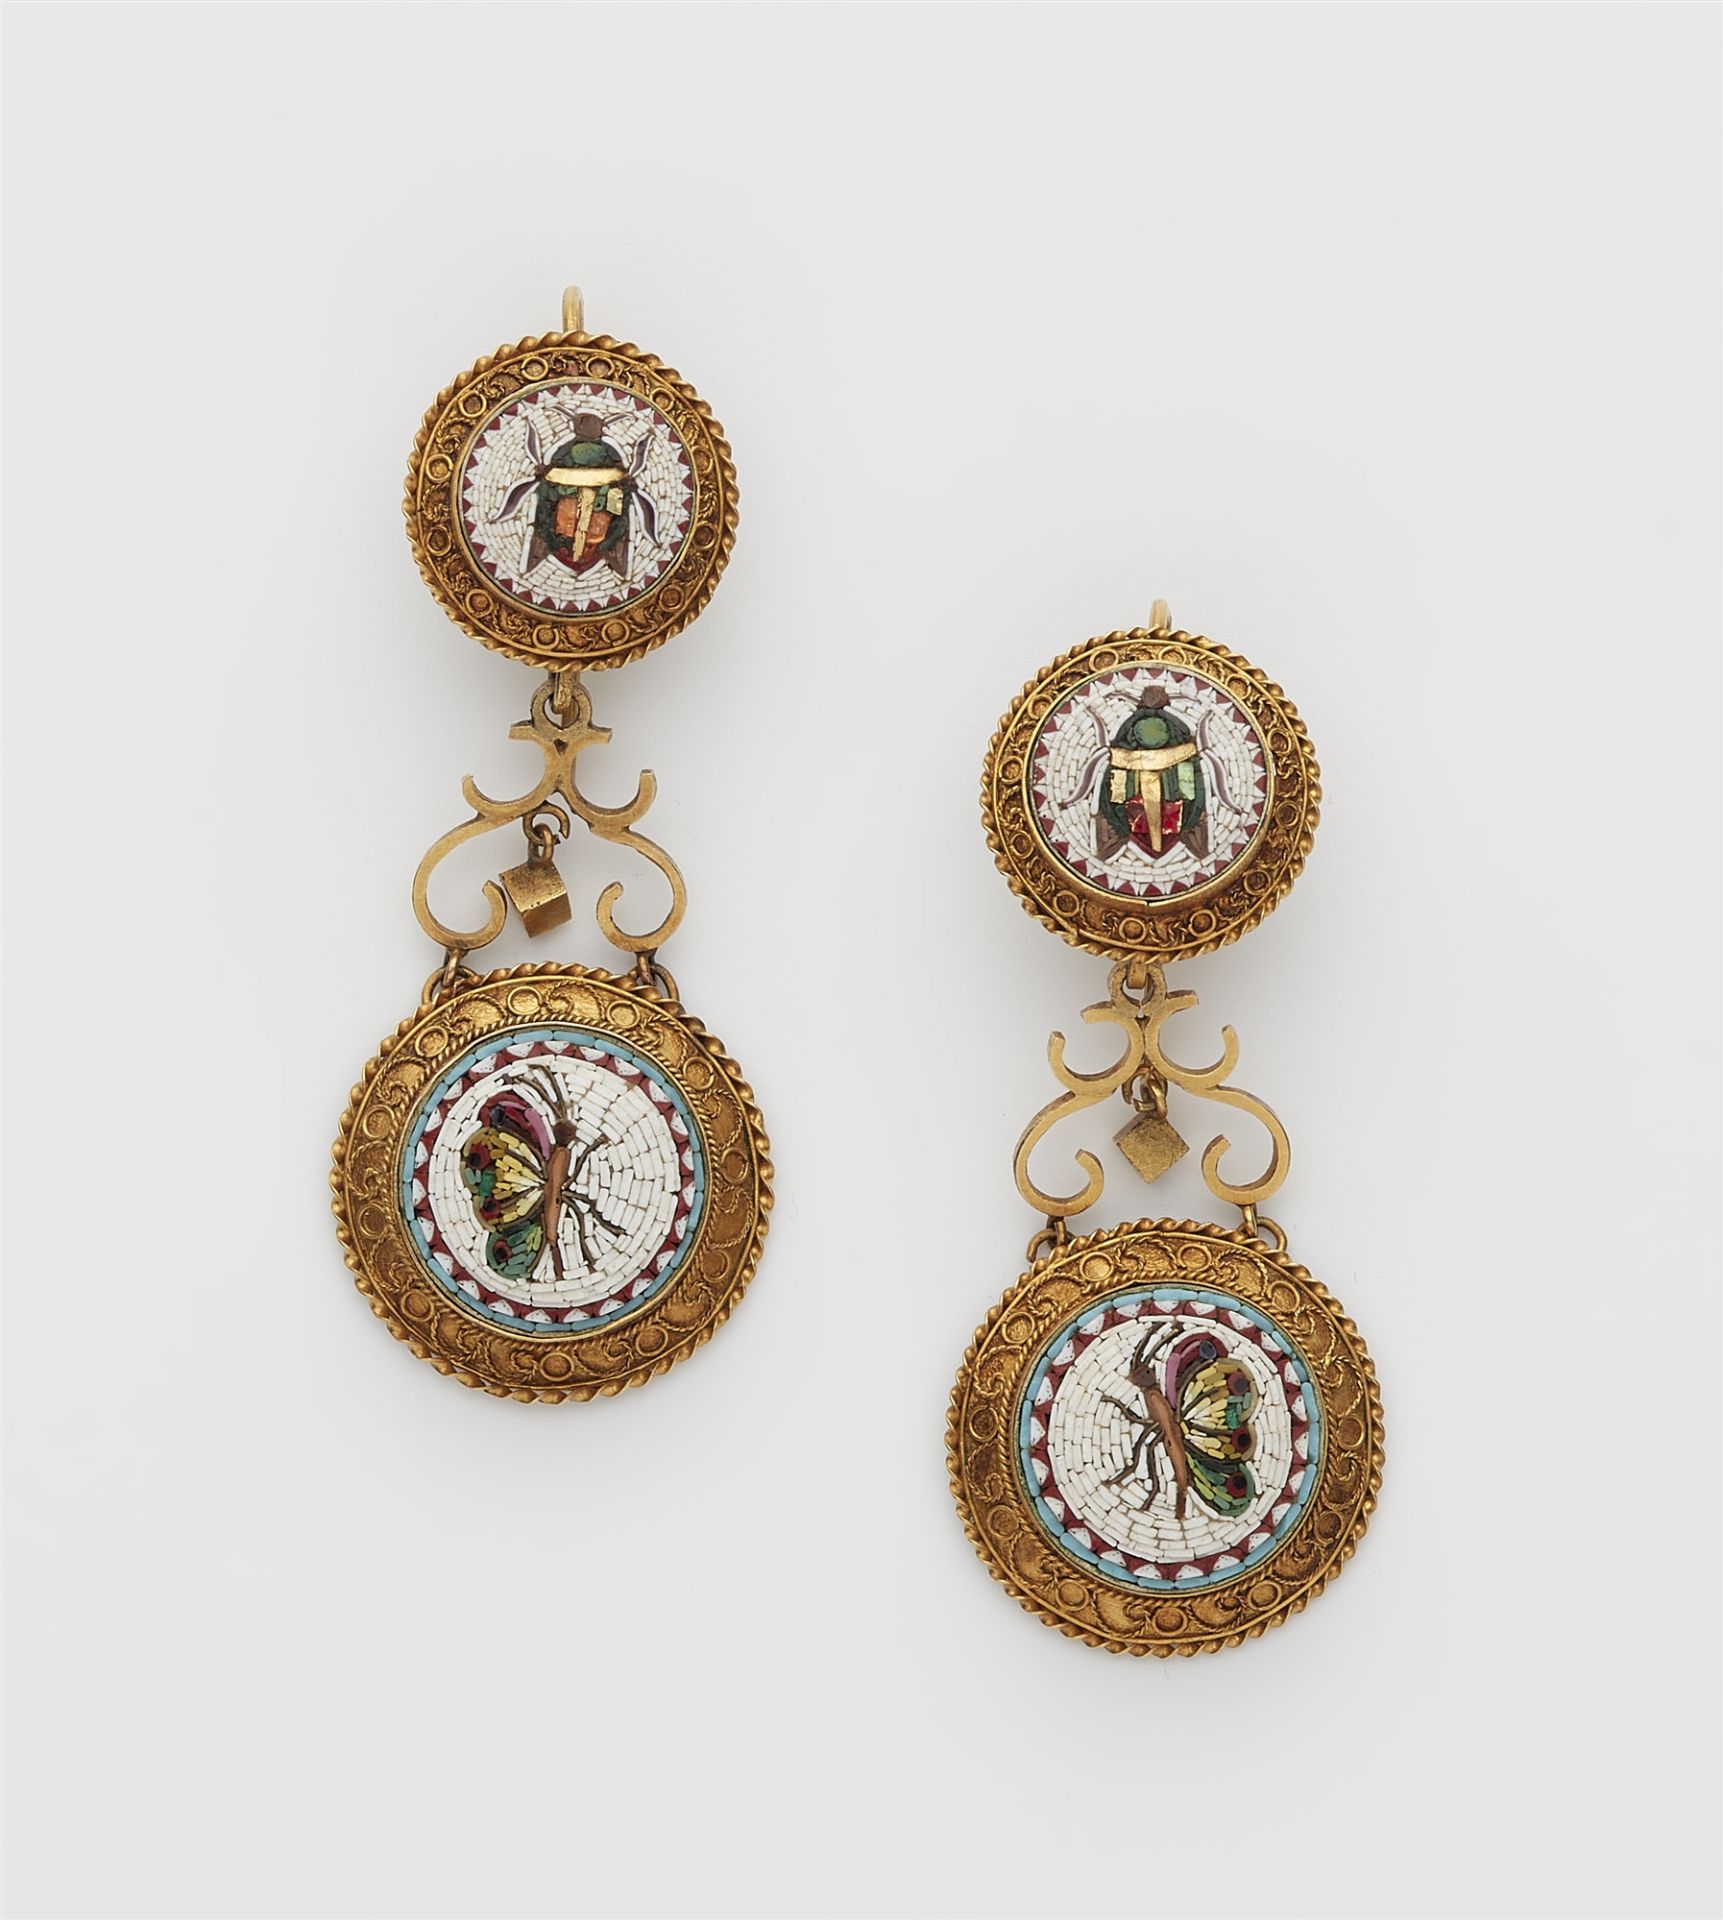 A pair of 8k gold filigree and Roman micromosaic earrings.